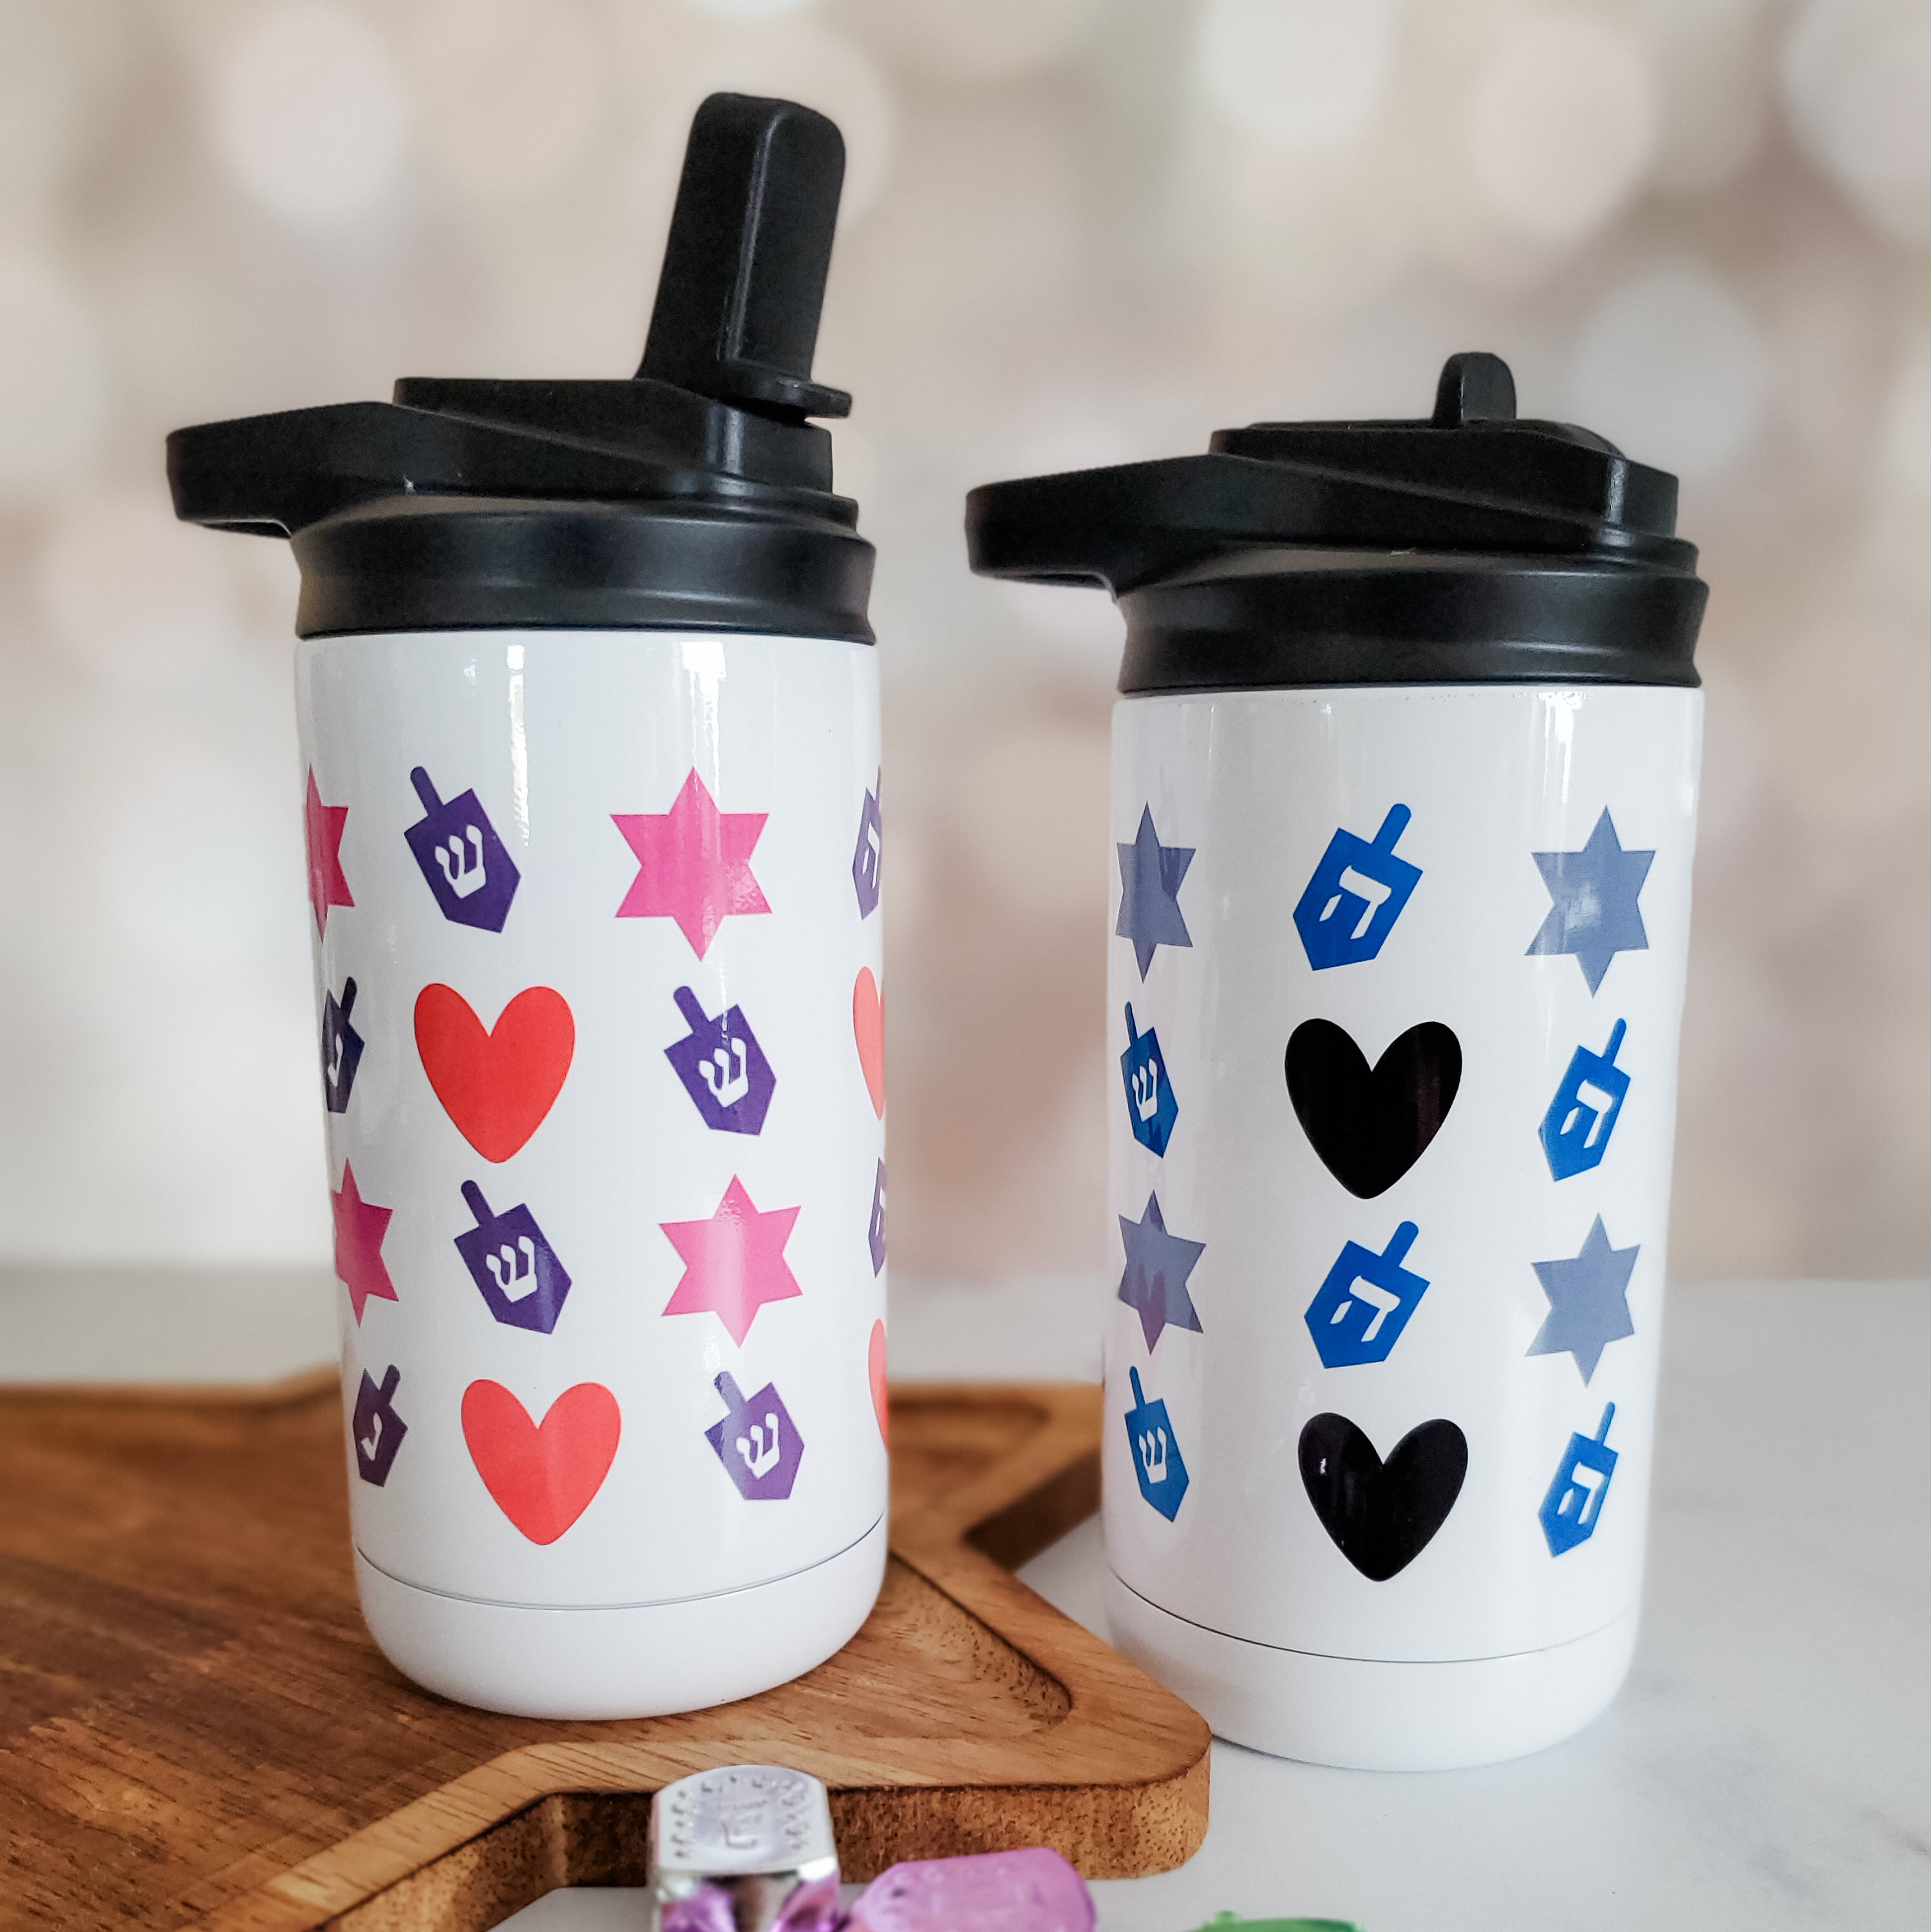 Kawaii Christmas Thermal Cup Coffee Travel Mug Cute 240/360ml Stainless  Steel Portable Thermos For Water Tea Milk Tumbler Gift